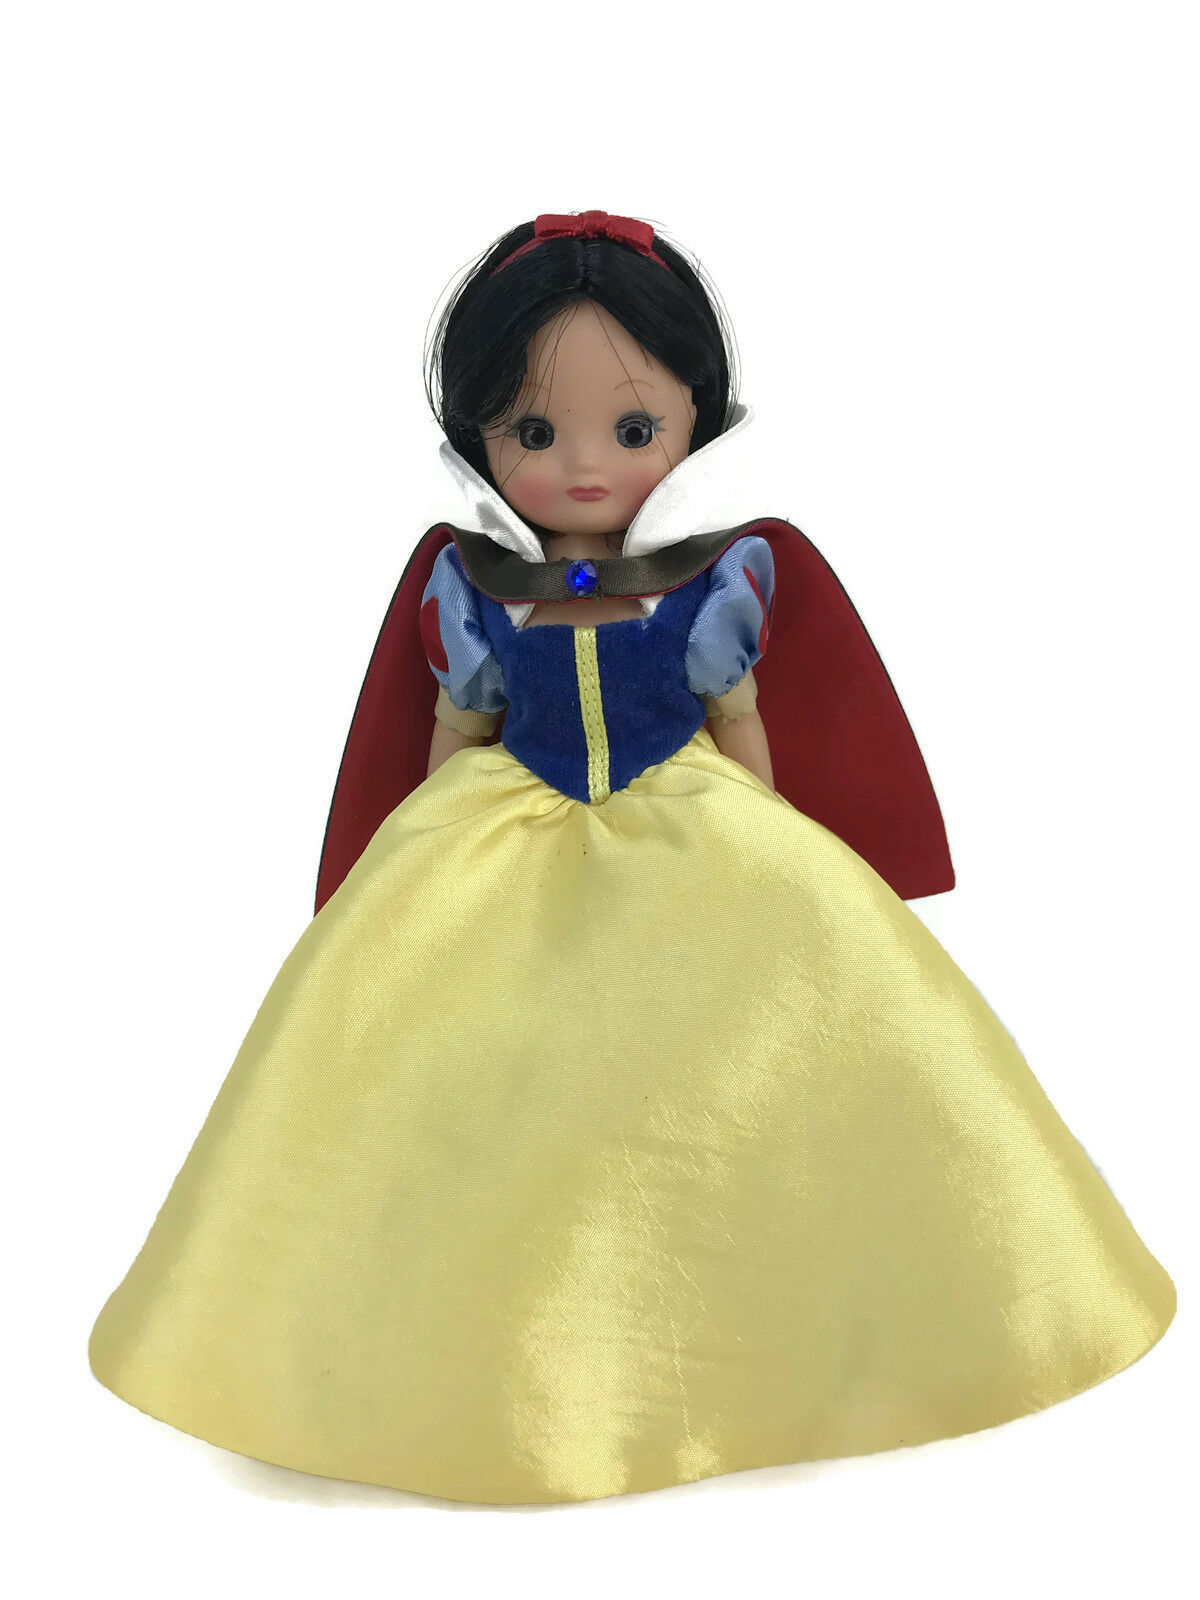 Tonner Tiny Betsy Mccall Disney Snow White Convention Doll Limited Ed 400 8"